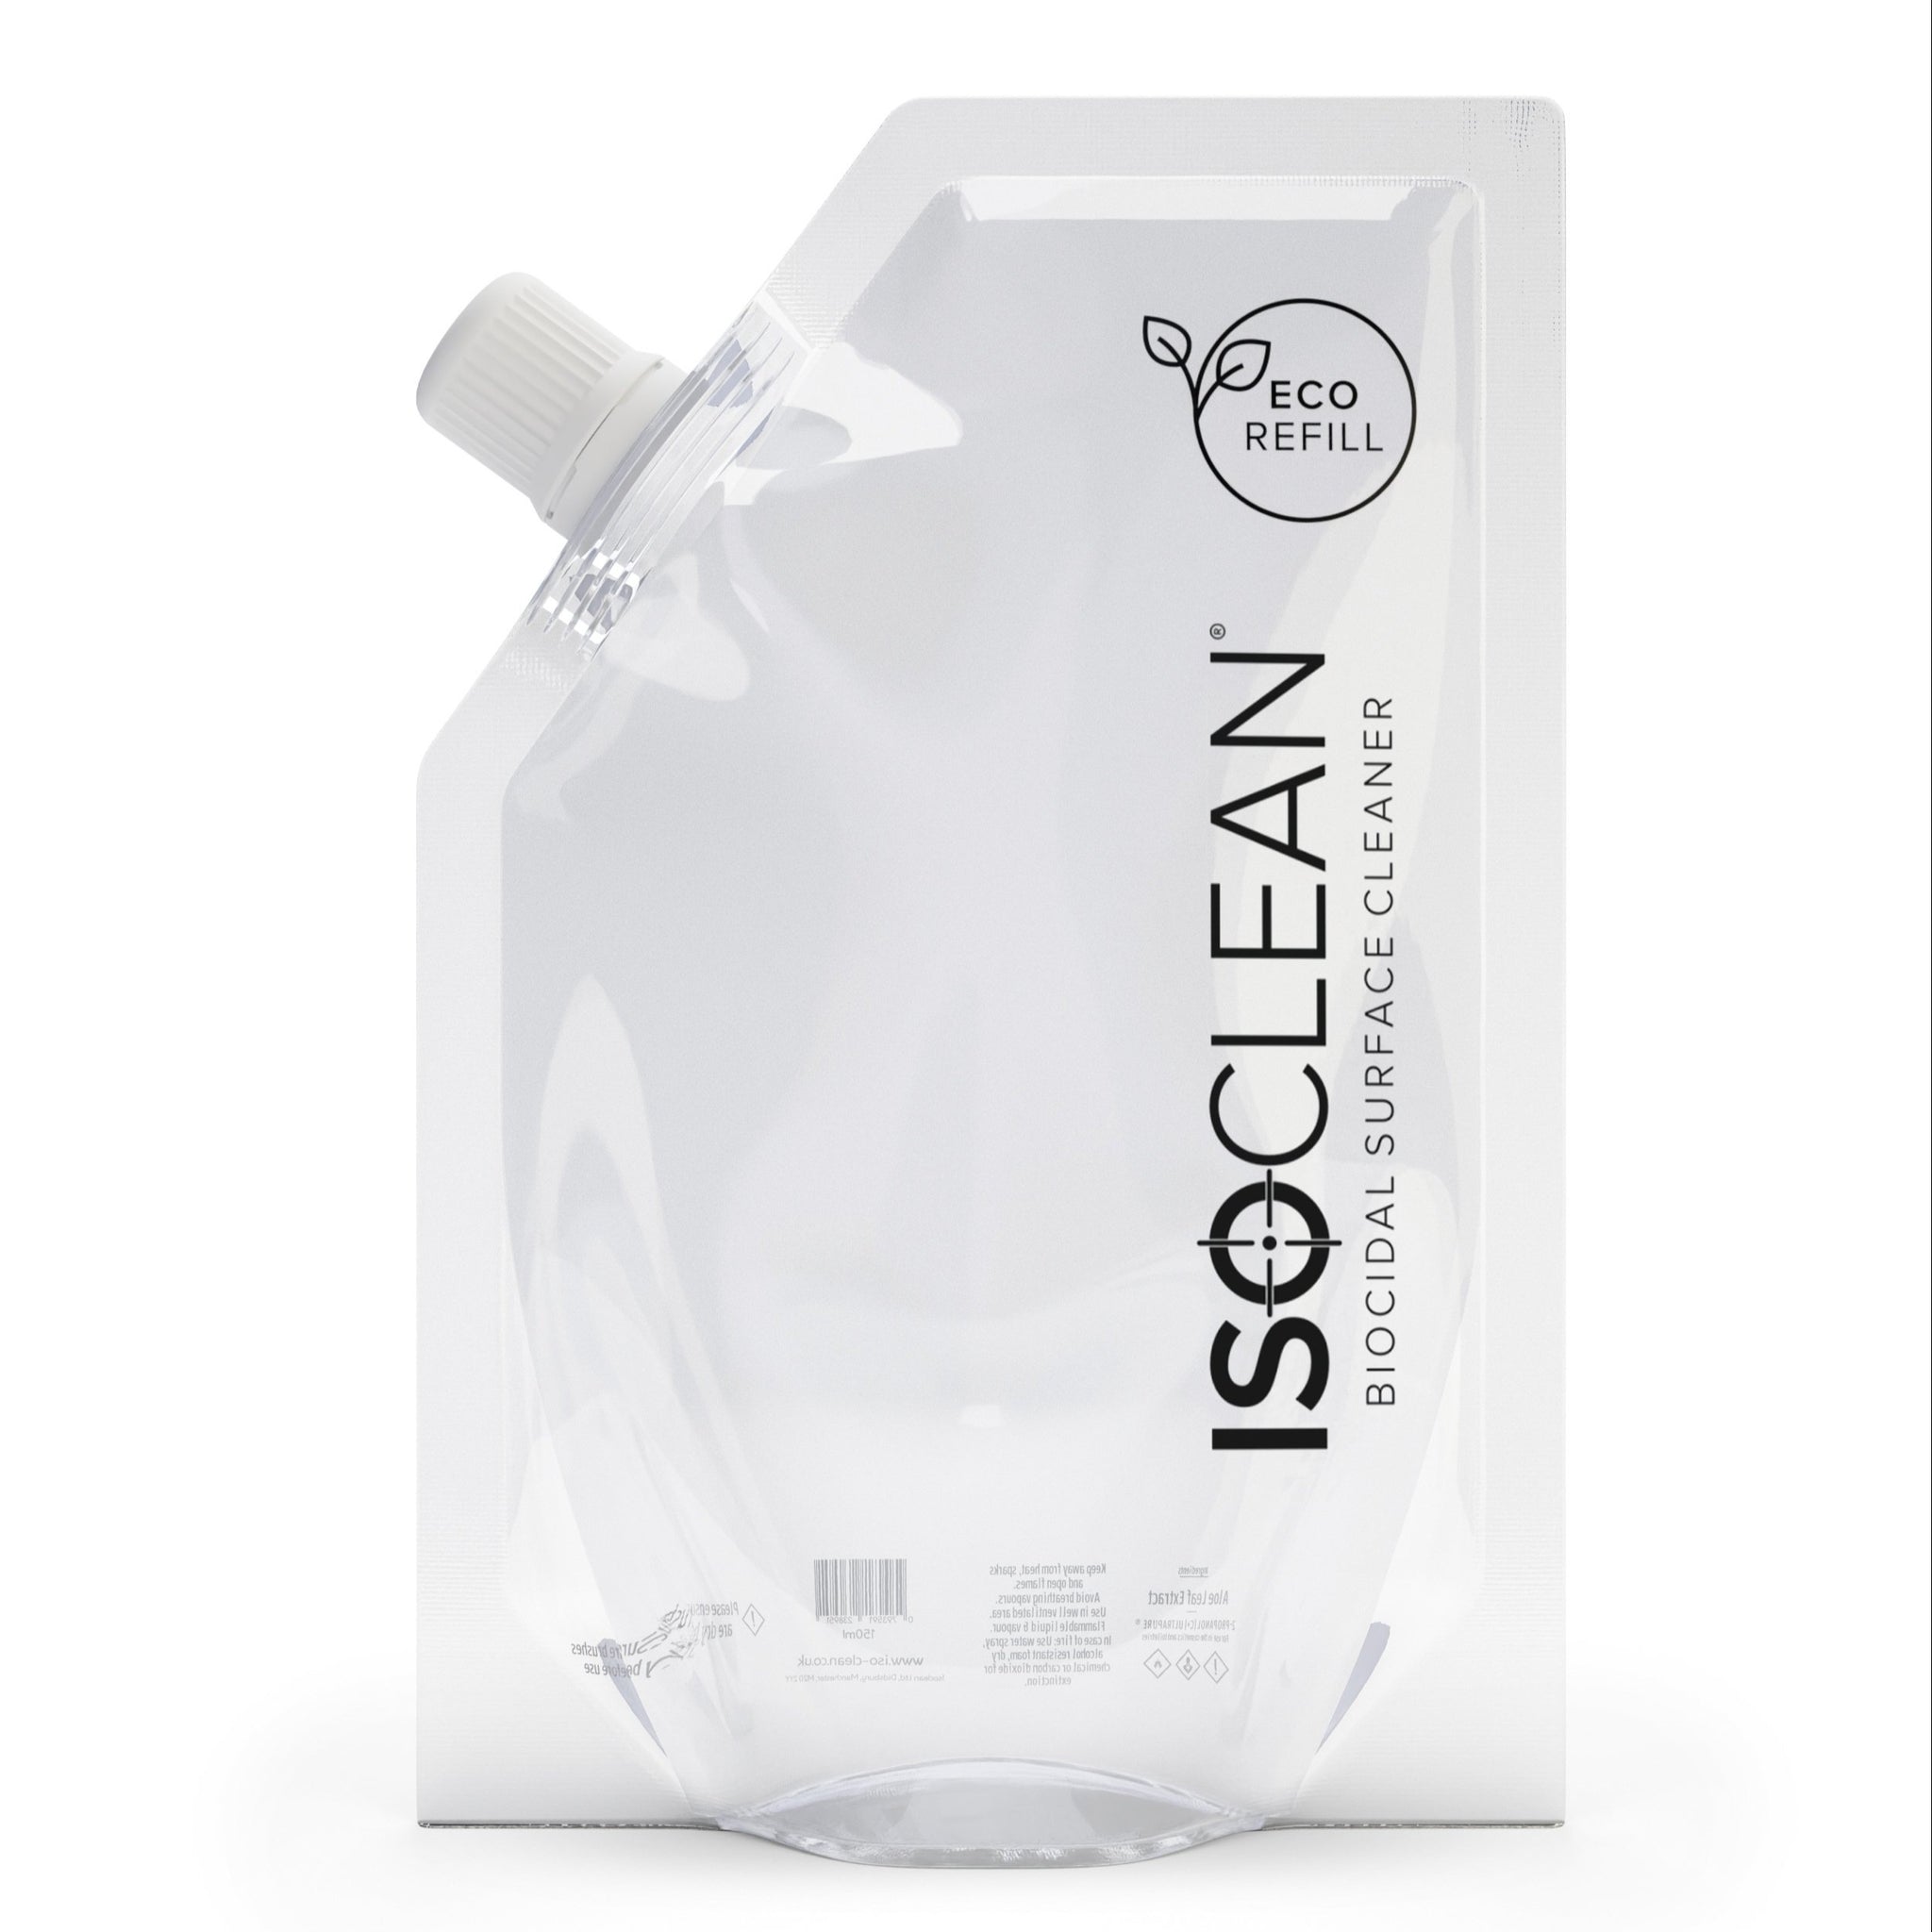 ISOCLEAN BIOCIDAL SURFACE CLEANER - ECO REFILL